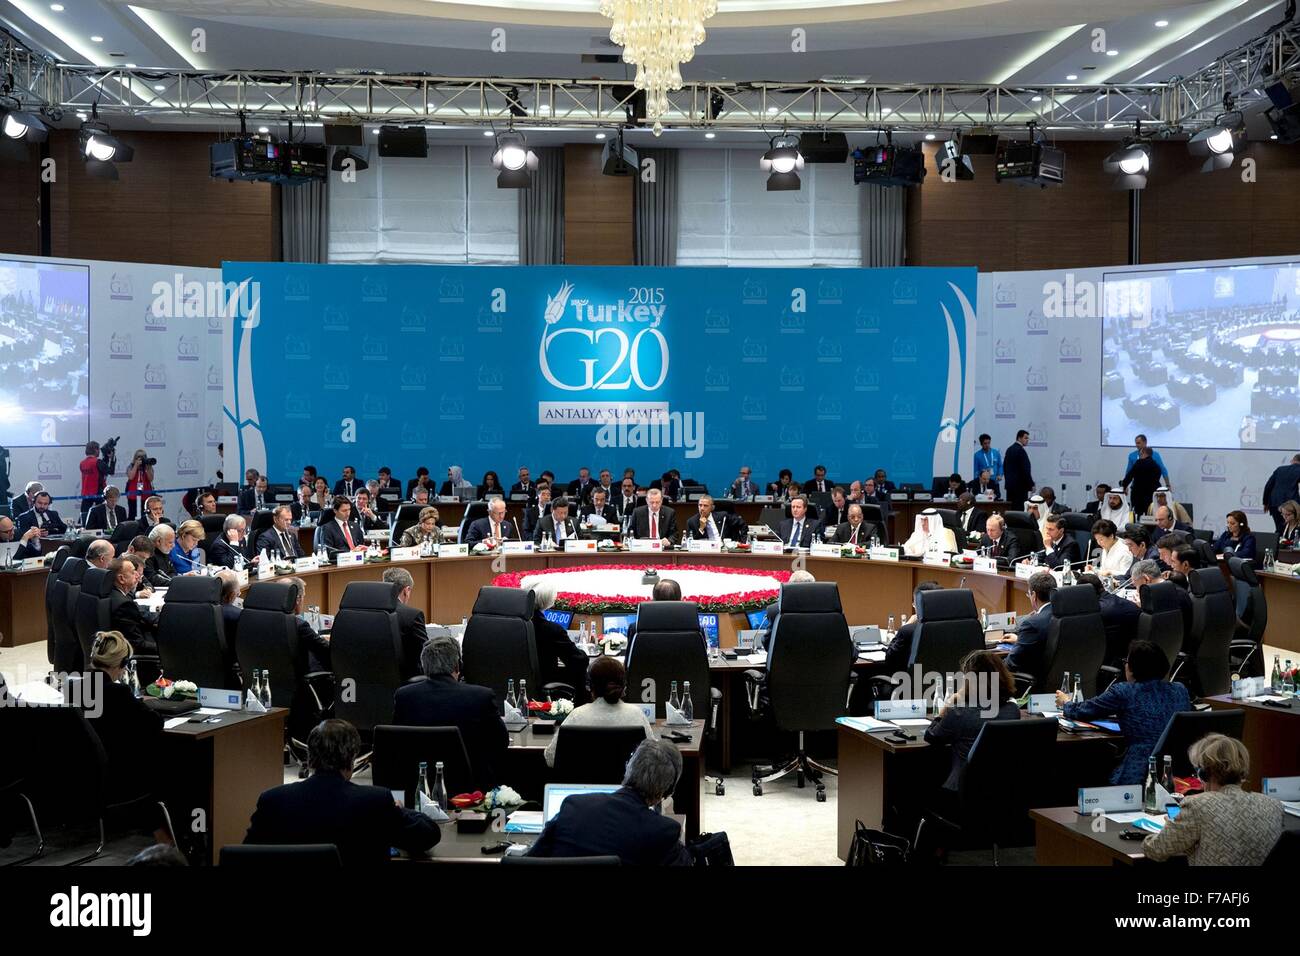 U.S. President Barack Obama participates in a global economy, growth strategies, employment and investment strategies session with G20 leaders during the G20 Summit at Regnum Carya Resort November 15, 2015 in Antalya, Turkey. Stock Photo